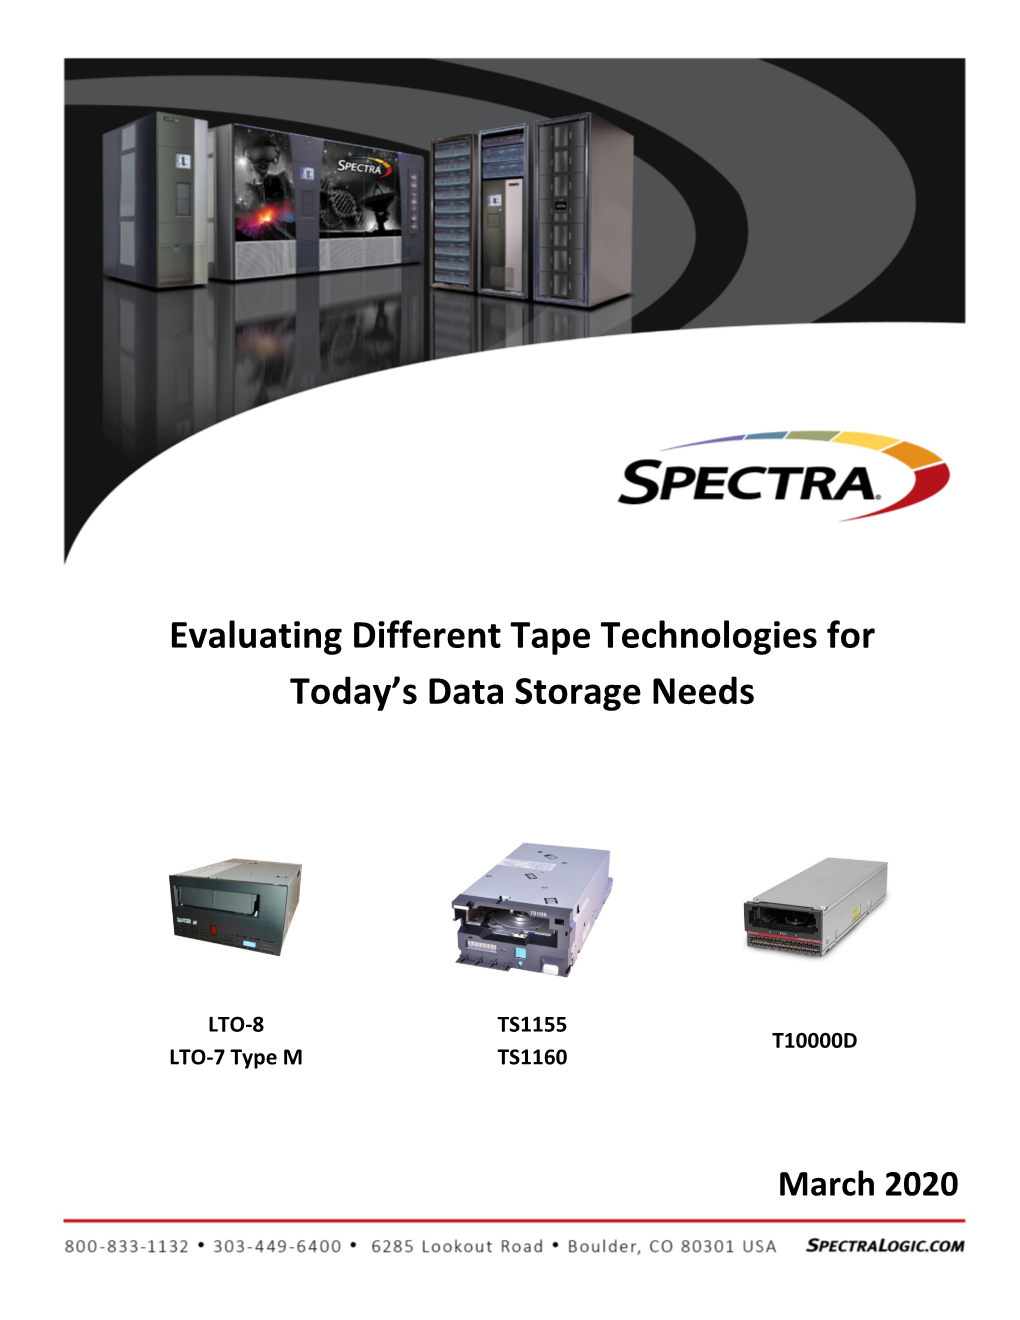 Evaluating Different Tape Technologies for Today's Data Storage Needs